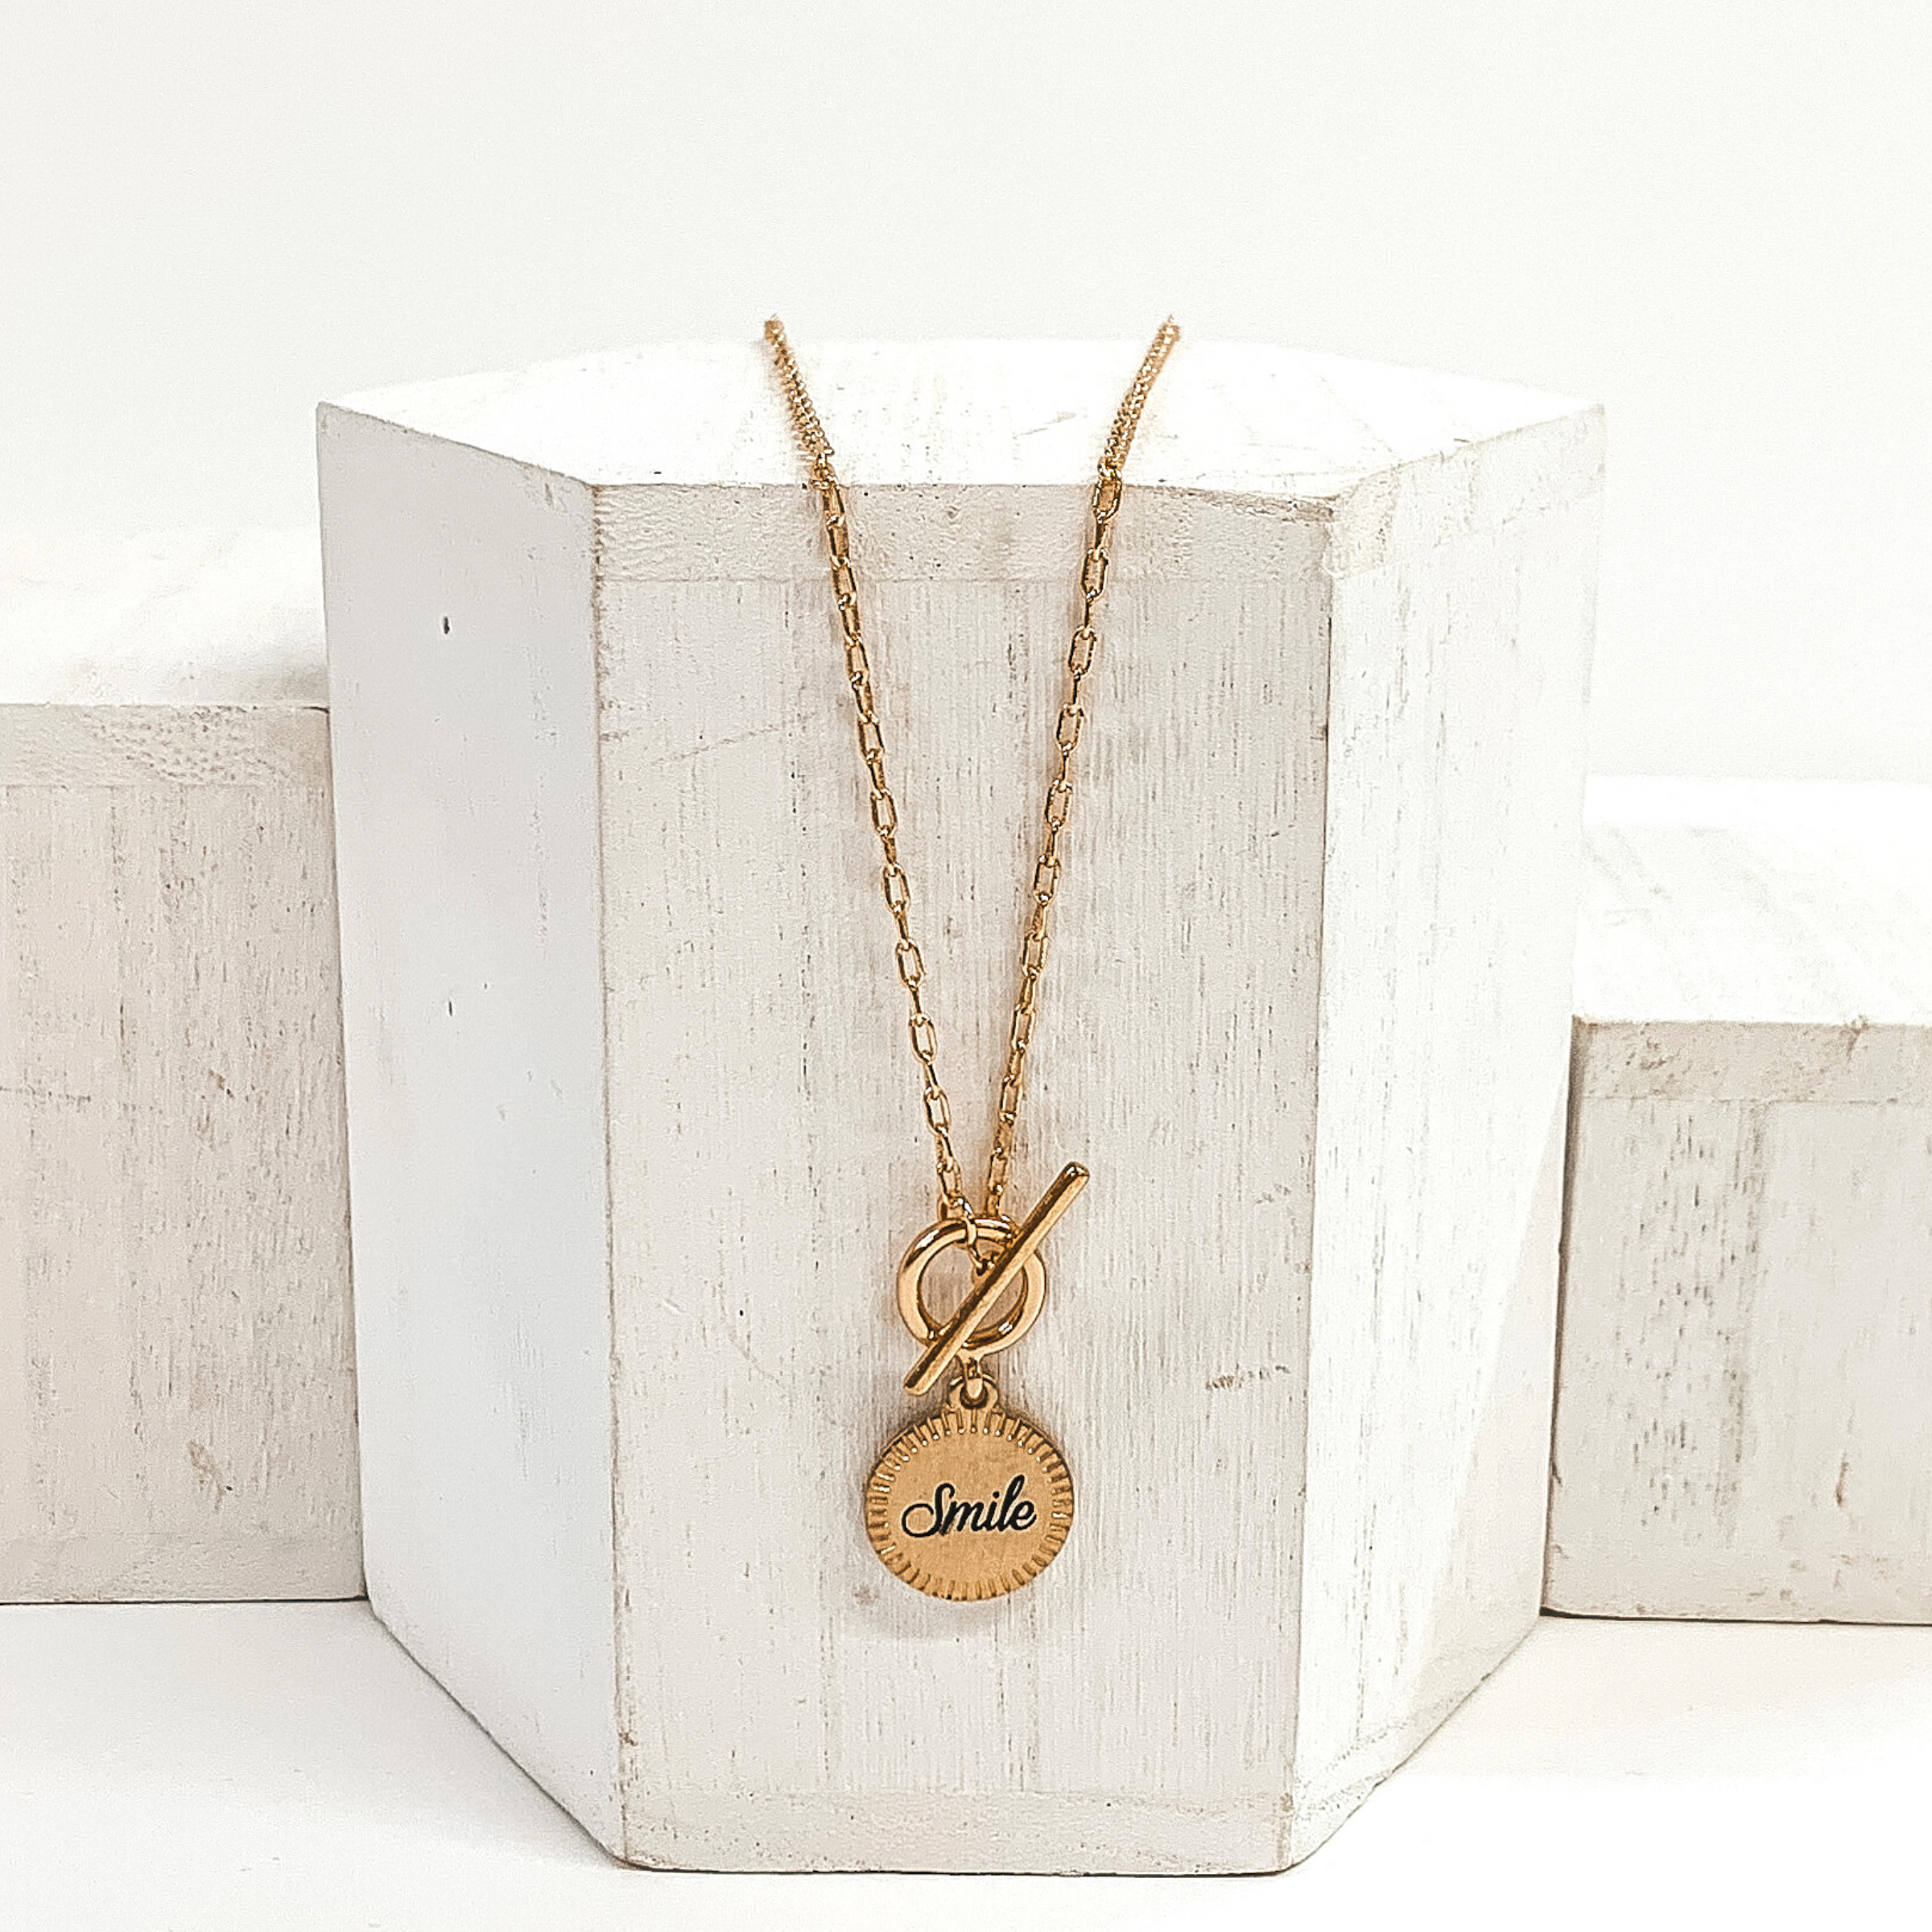 This is a gold necklace that has a front toggle clasp and a circle pendant with the word "smile" written in the center. This necklace is pictured laying on a white block and on a white background.